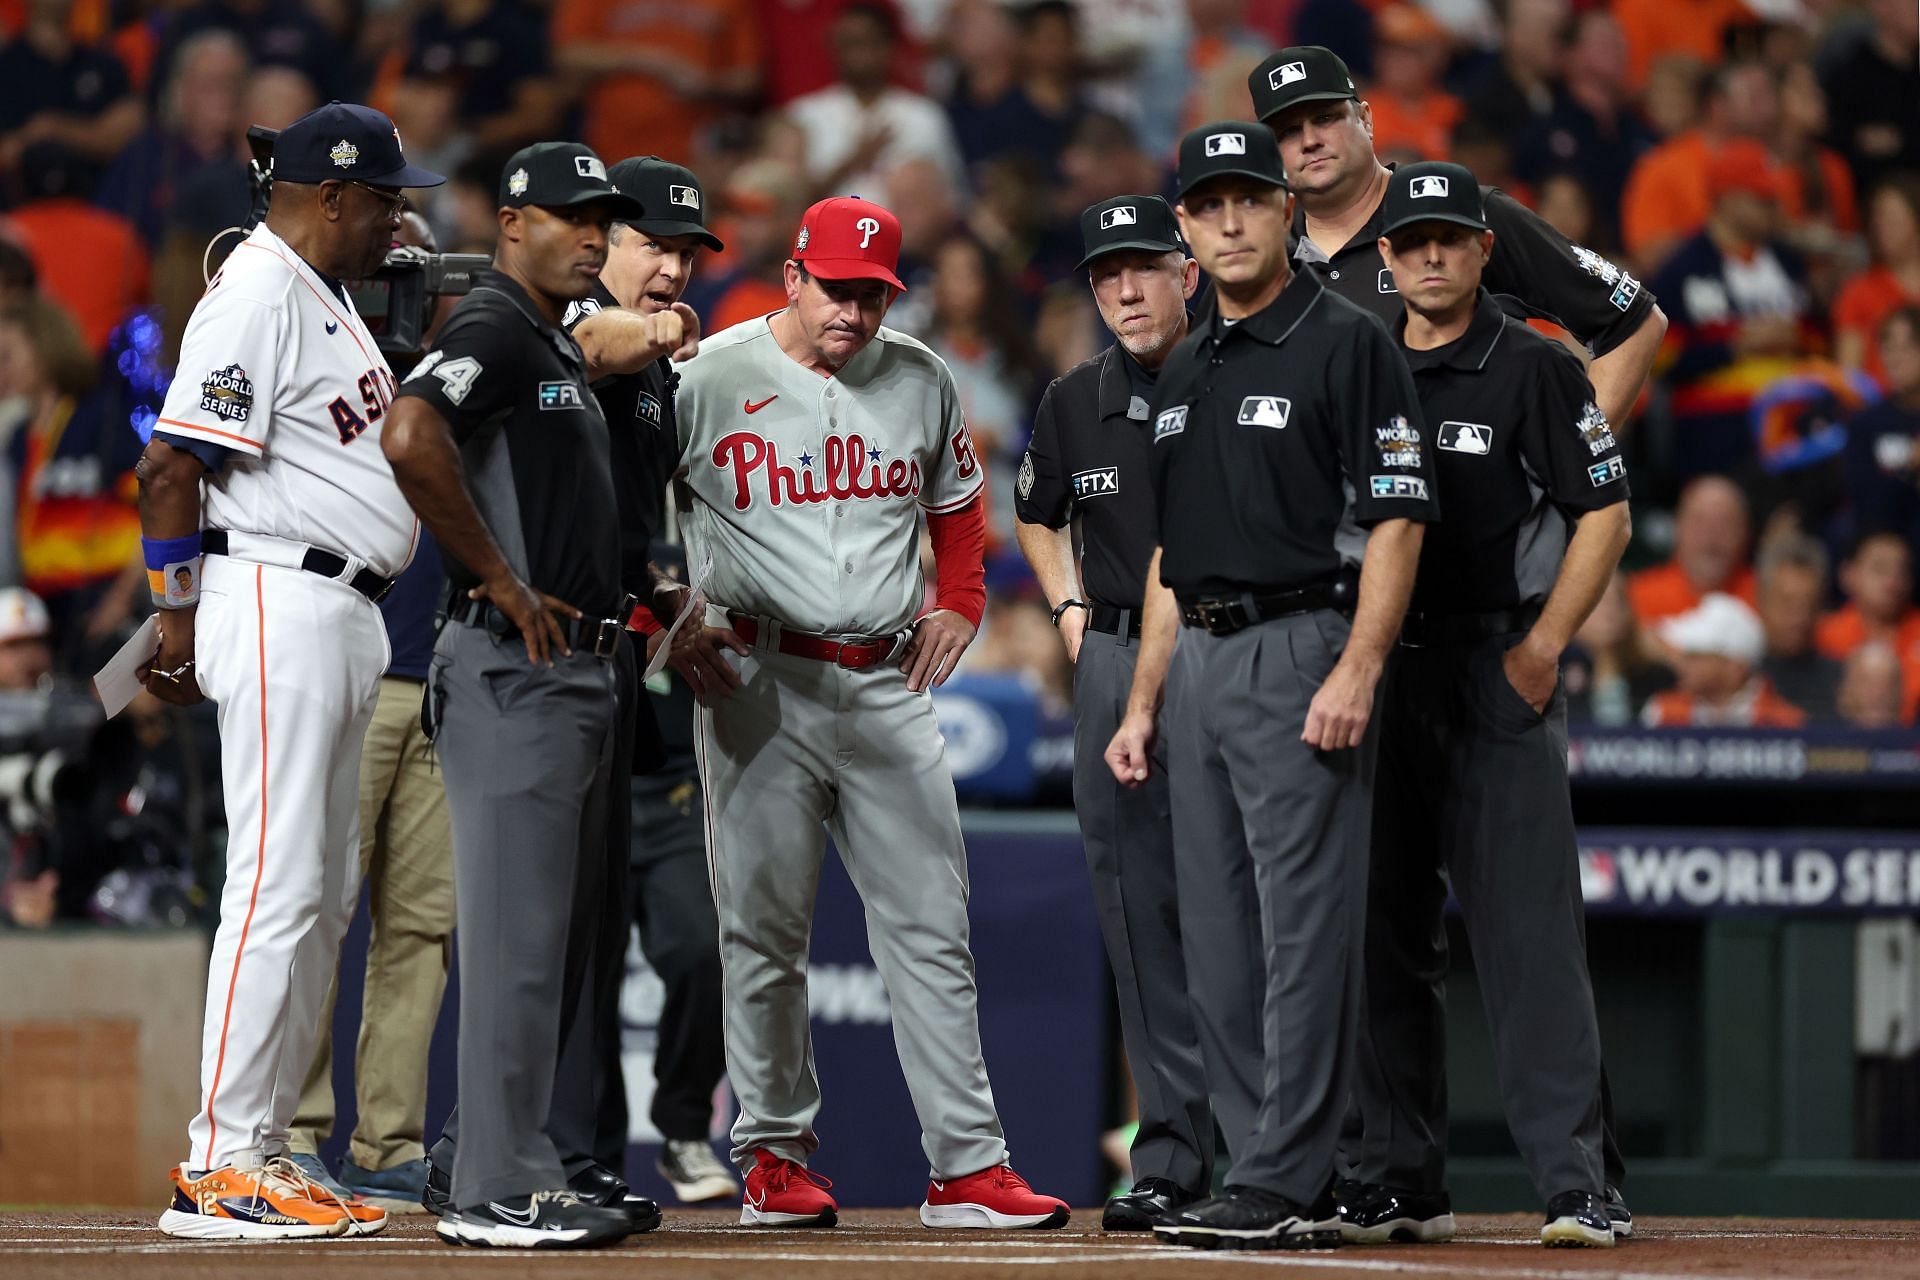 World Series umpire salaries: How much do MLB umpires get paid for 2022  World Series games?